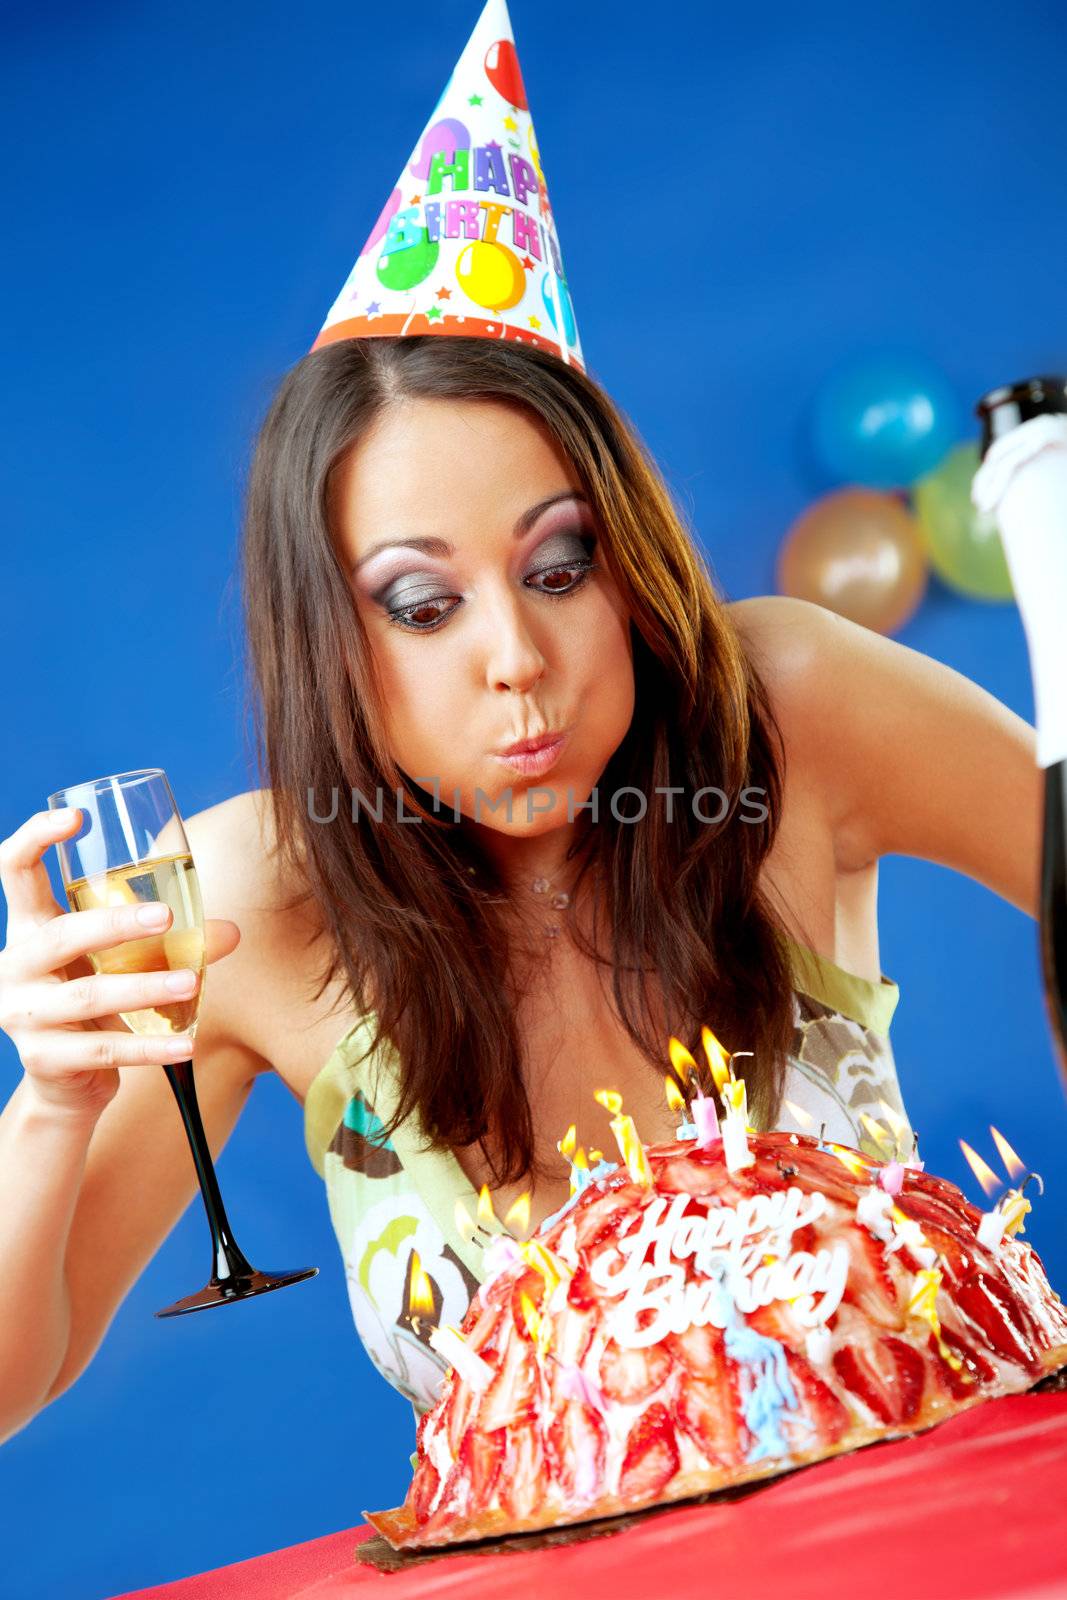 Woman blowing birthday candles by vilevi